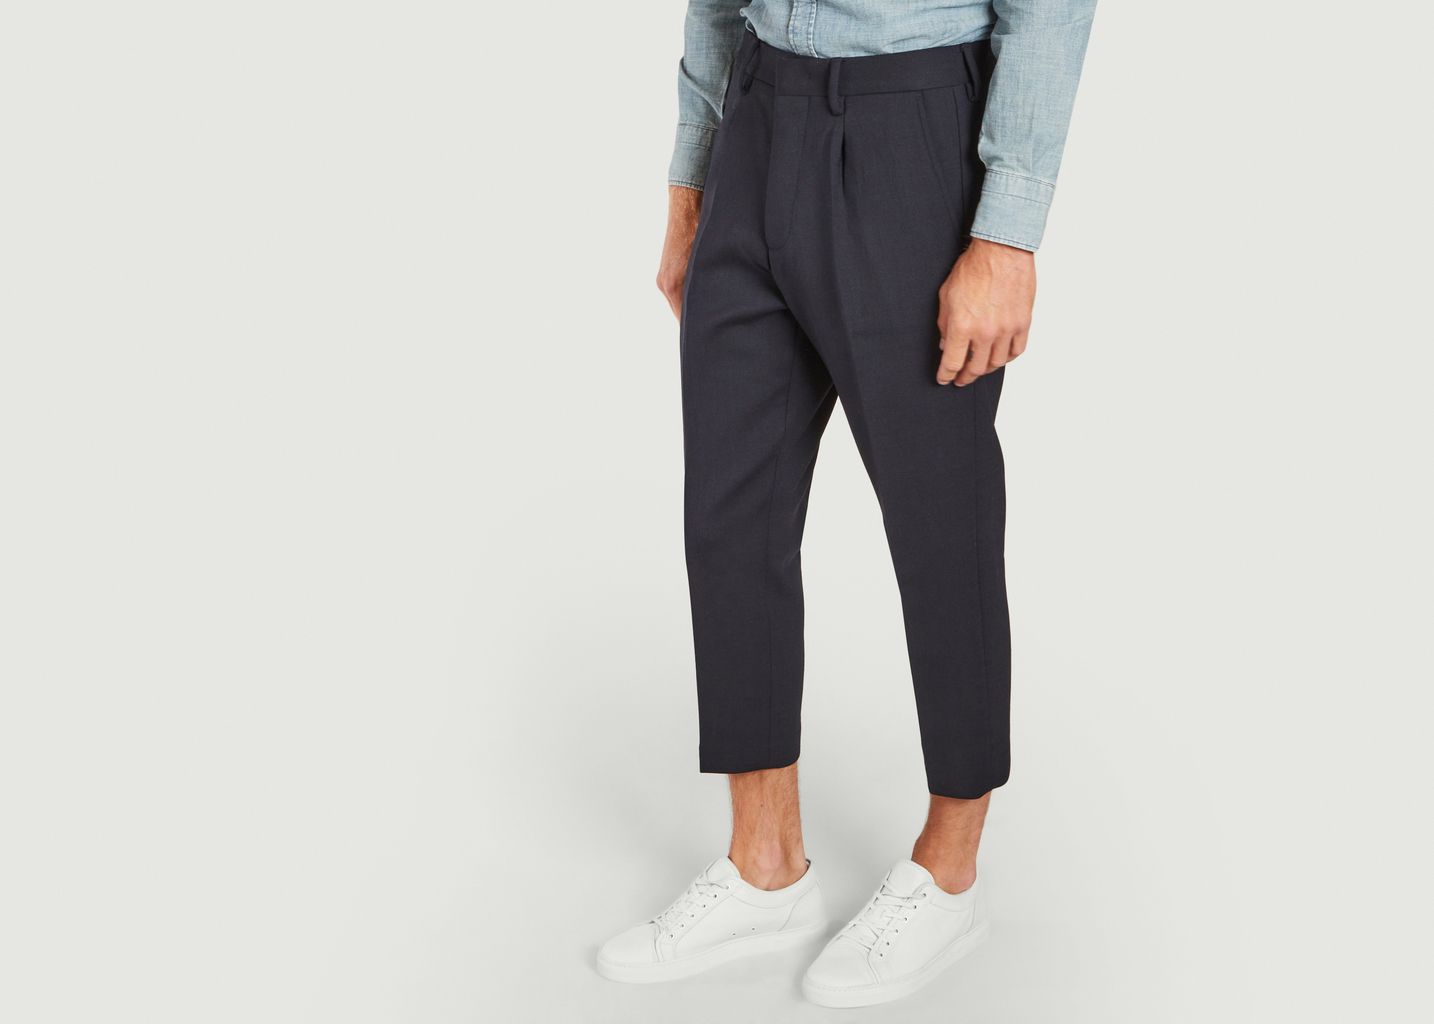 Bill relax fit 7/8 length trousers - NN07